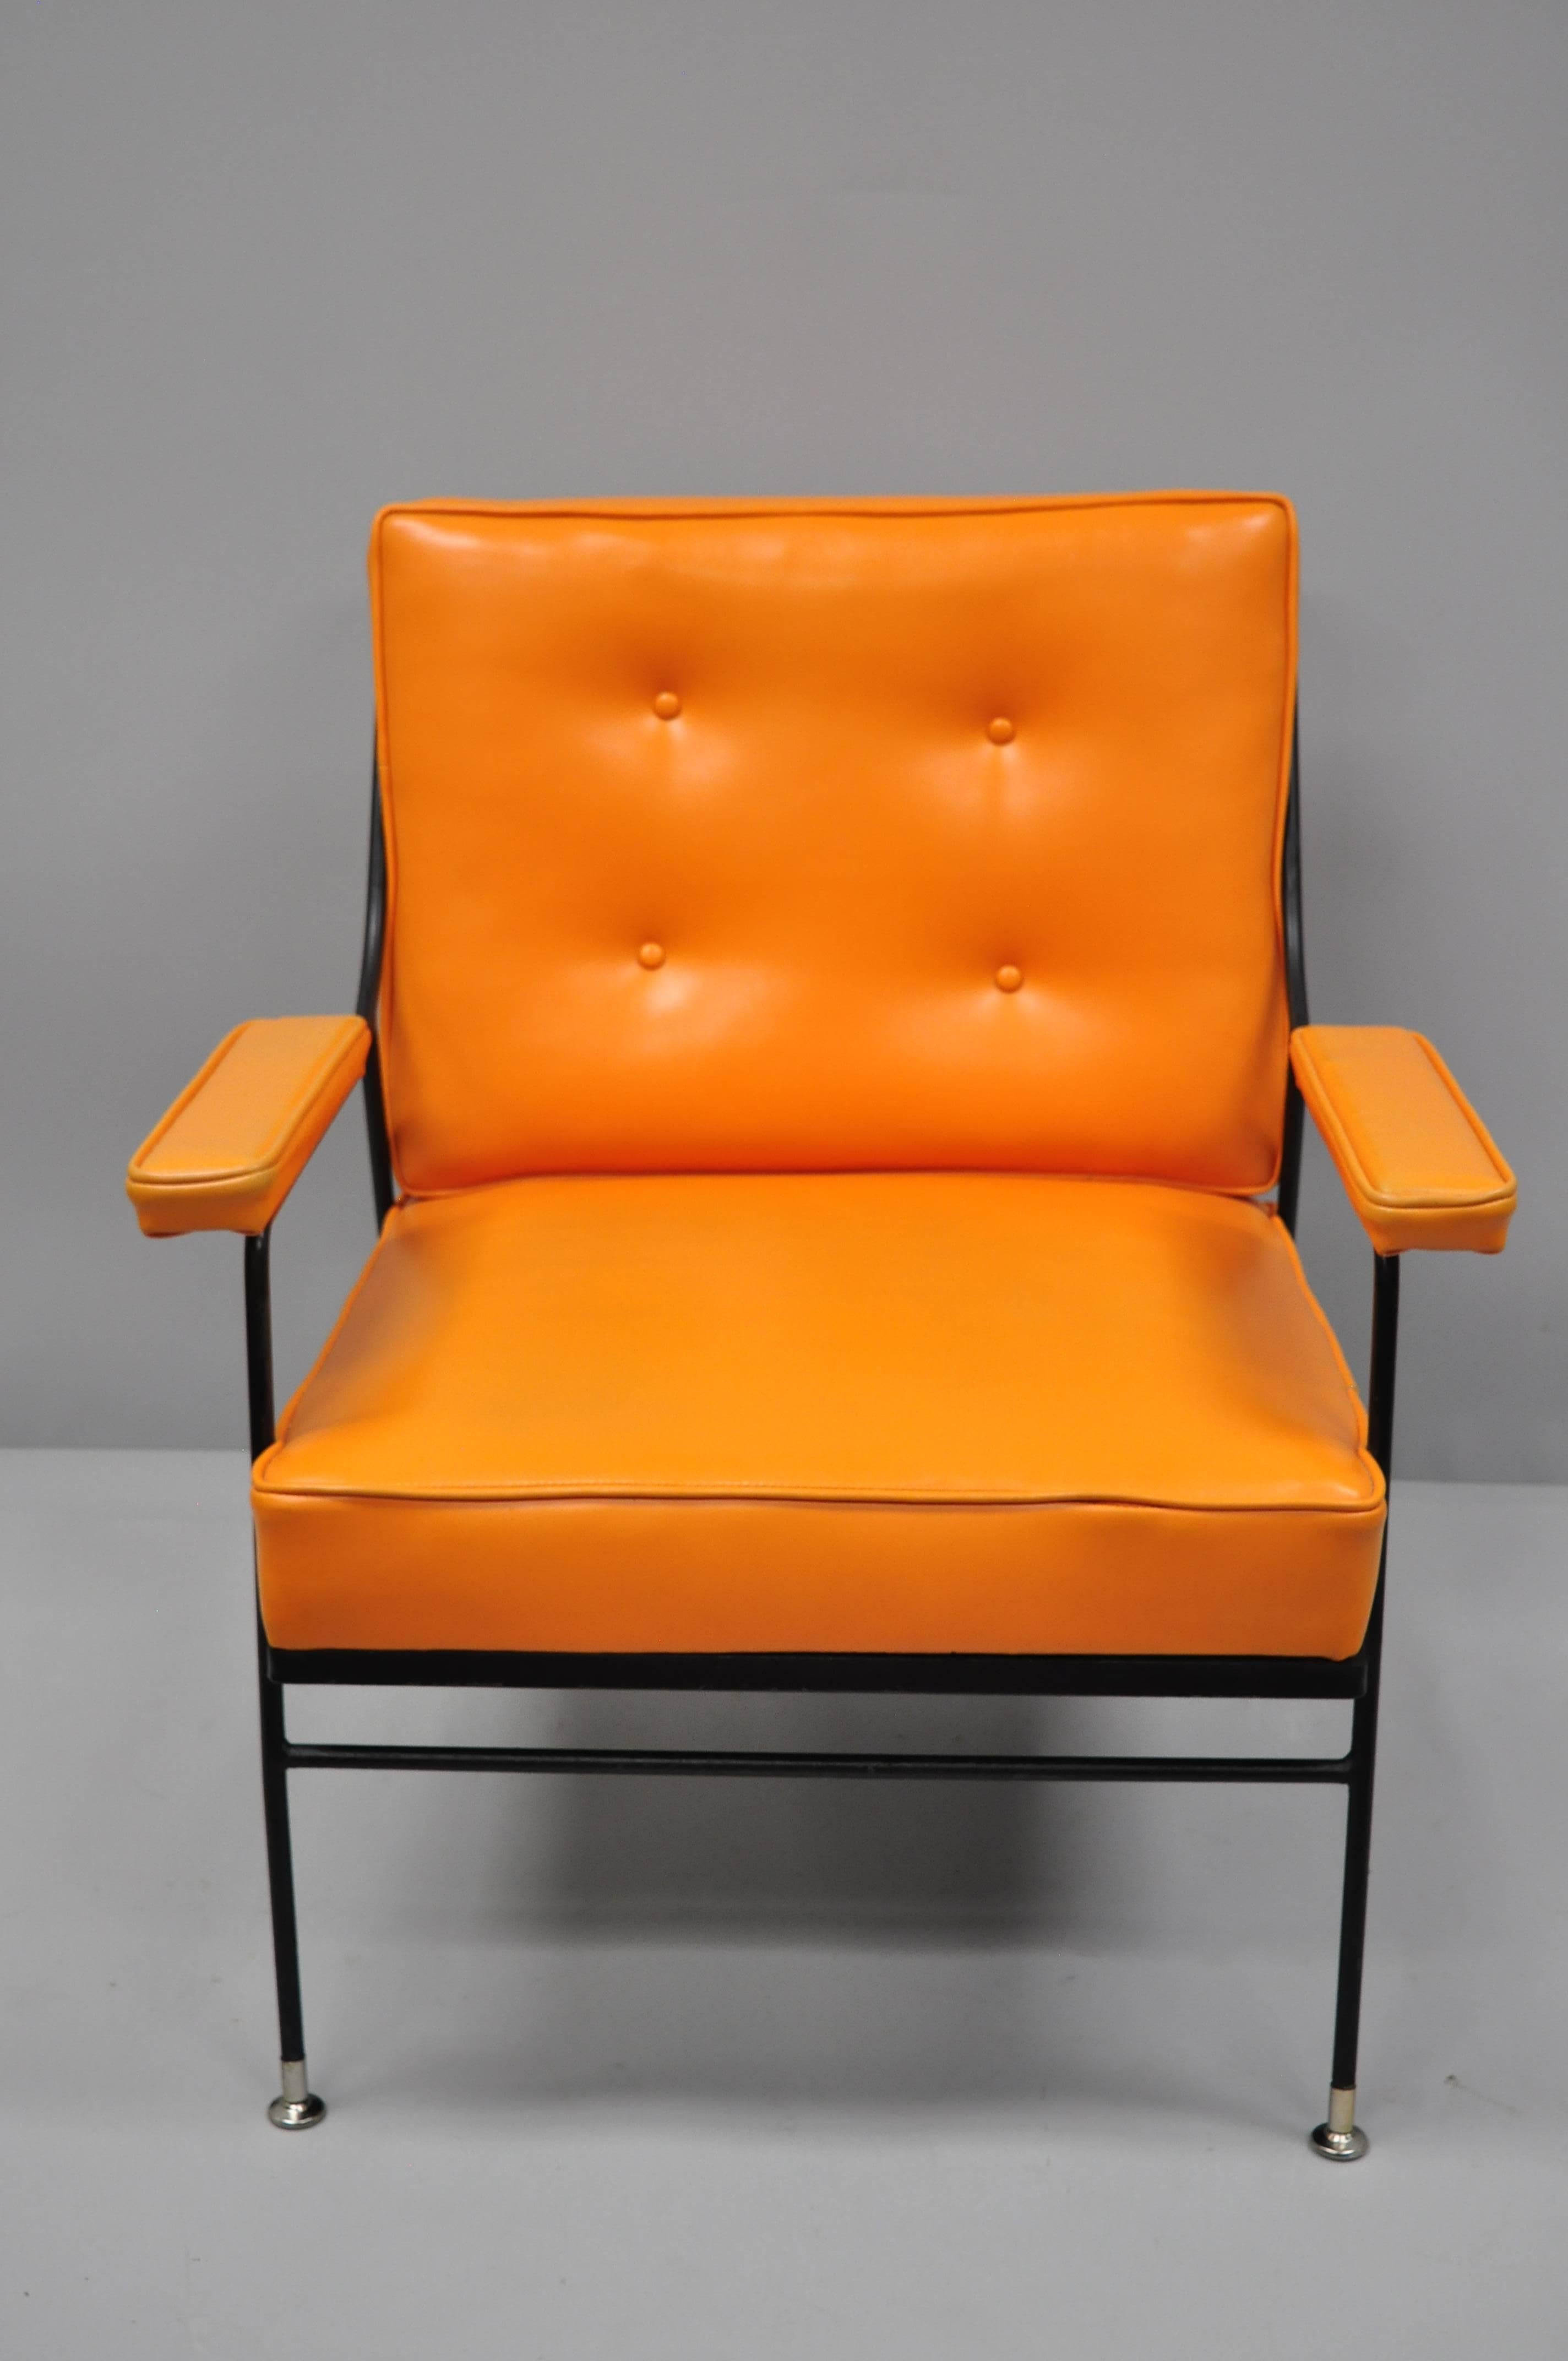 American Pair of Wrought Iron & Orange Vinyl Lounge Chairs attr Milo Baughman for Pacific